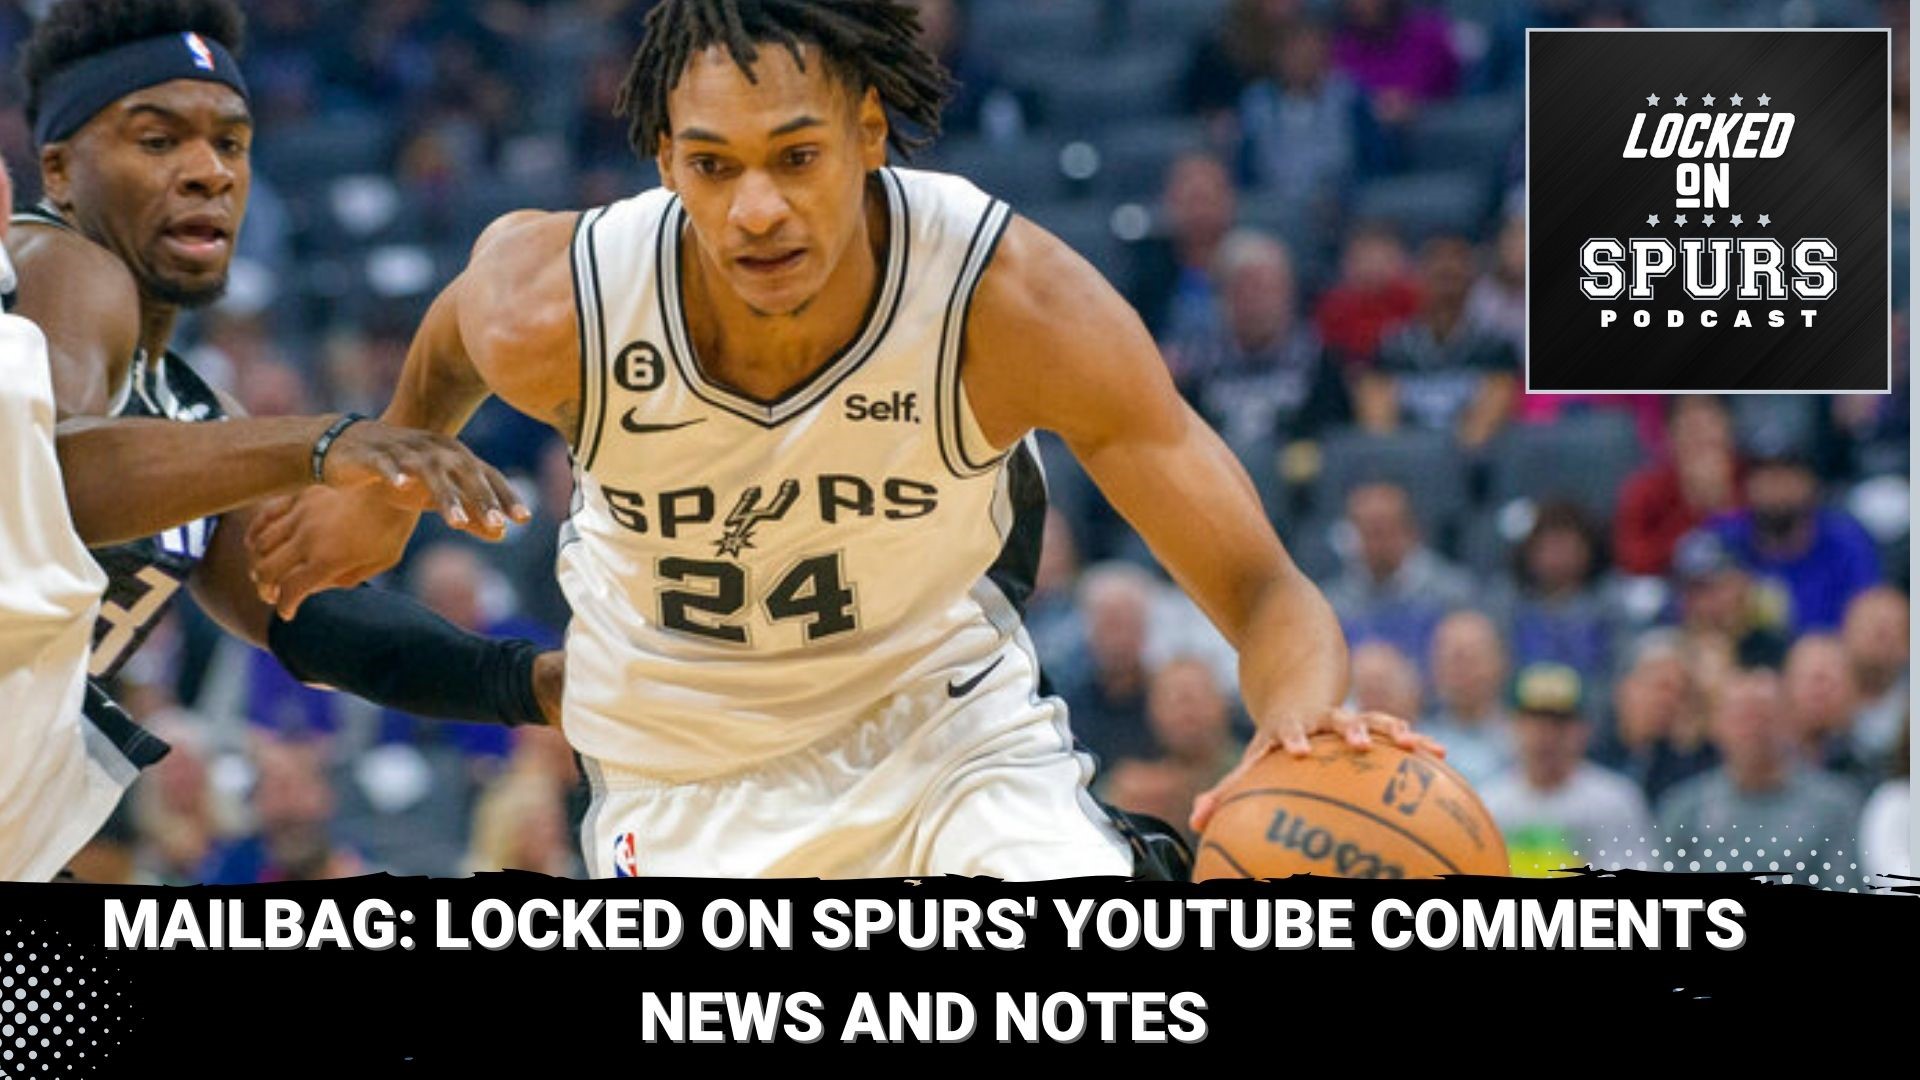 We read fan YouTube comments and thoughts about the Spurs.